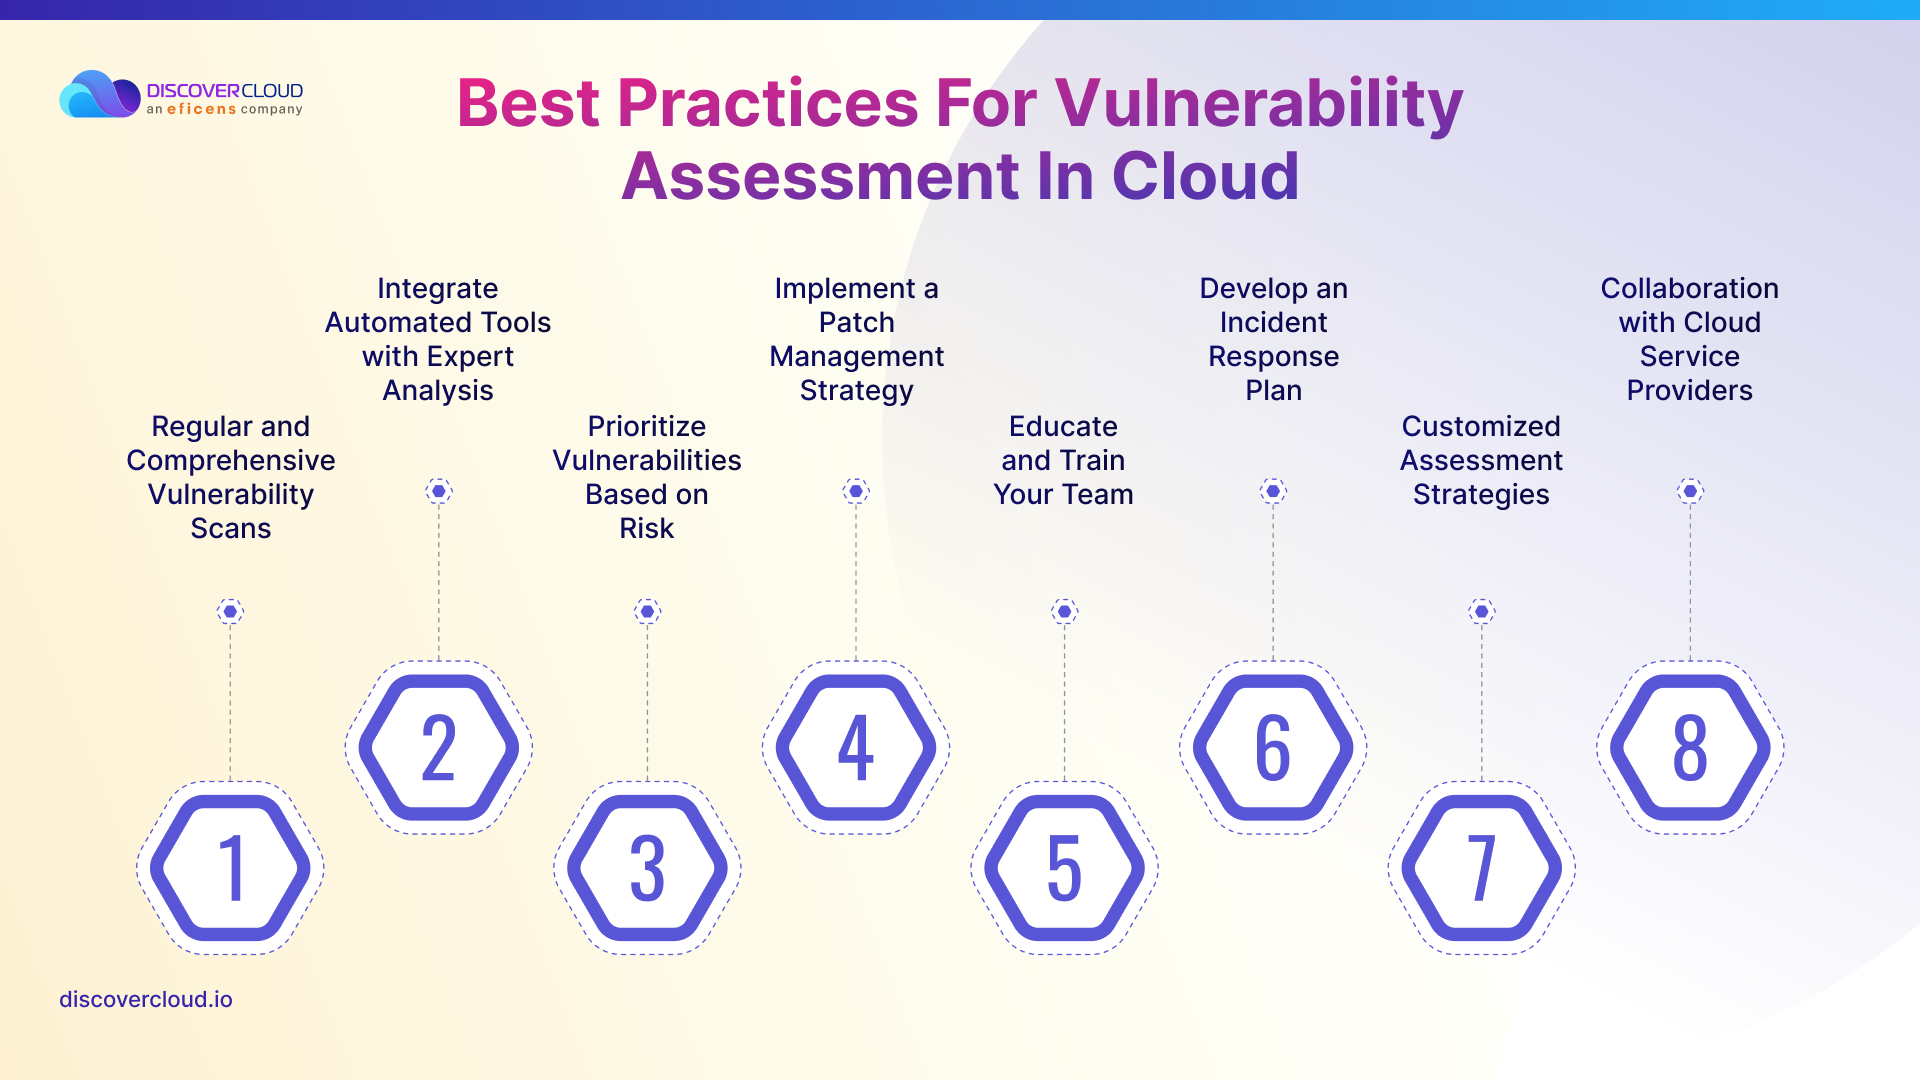 Best Practices for Vulnerability Assessment in Cloud